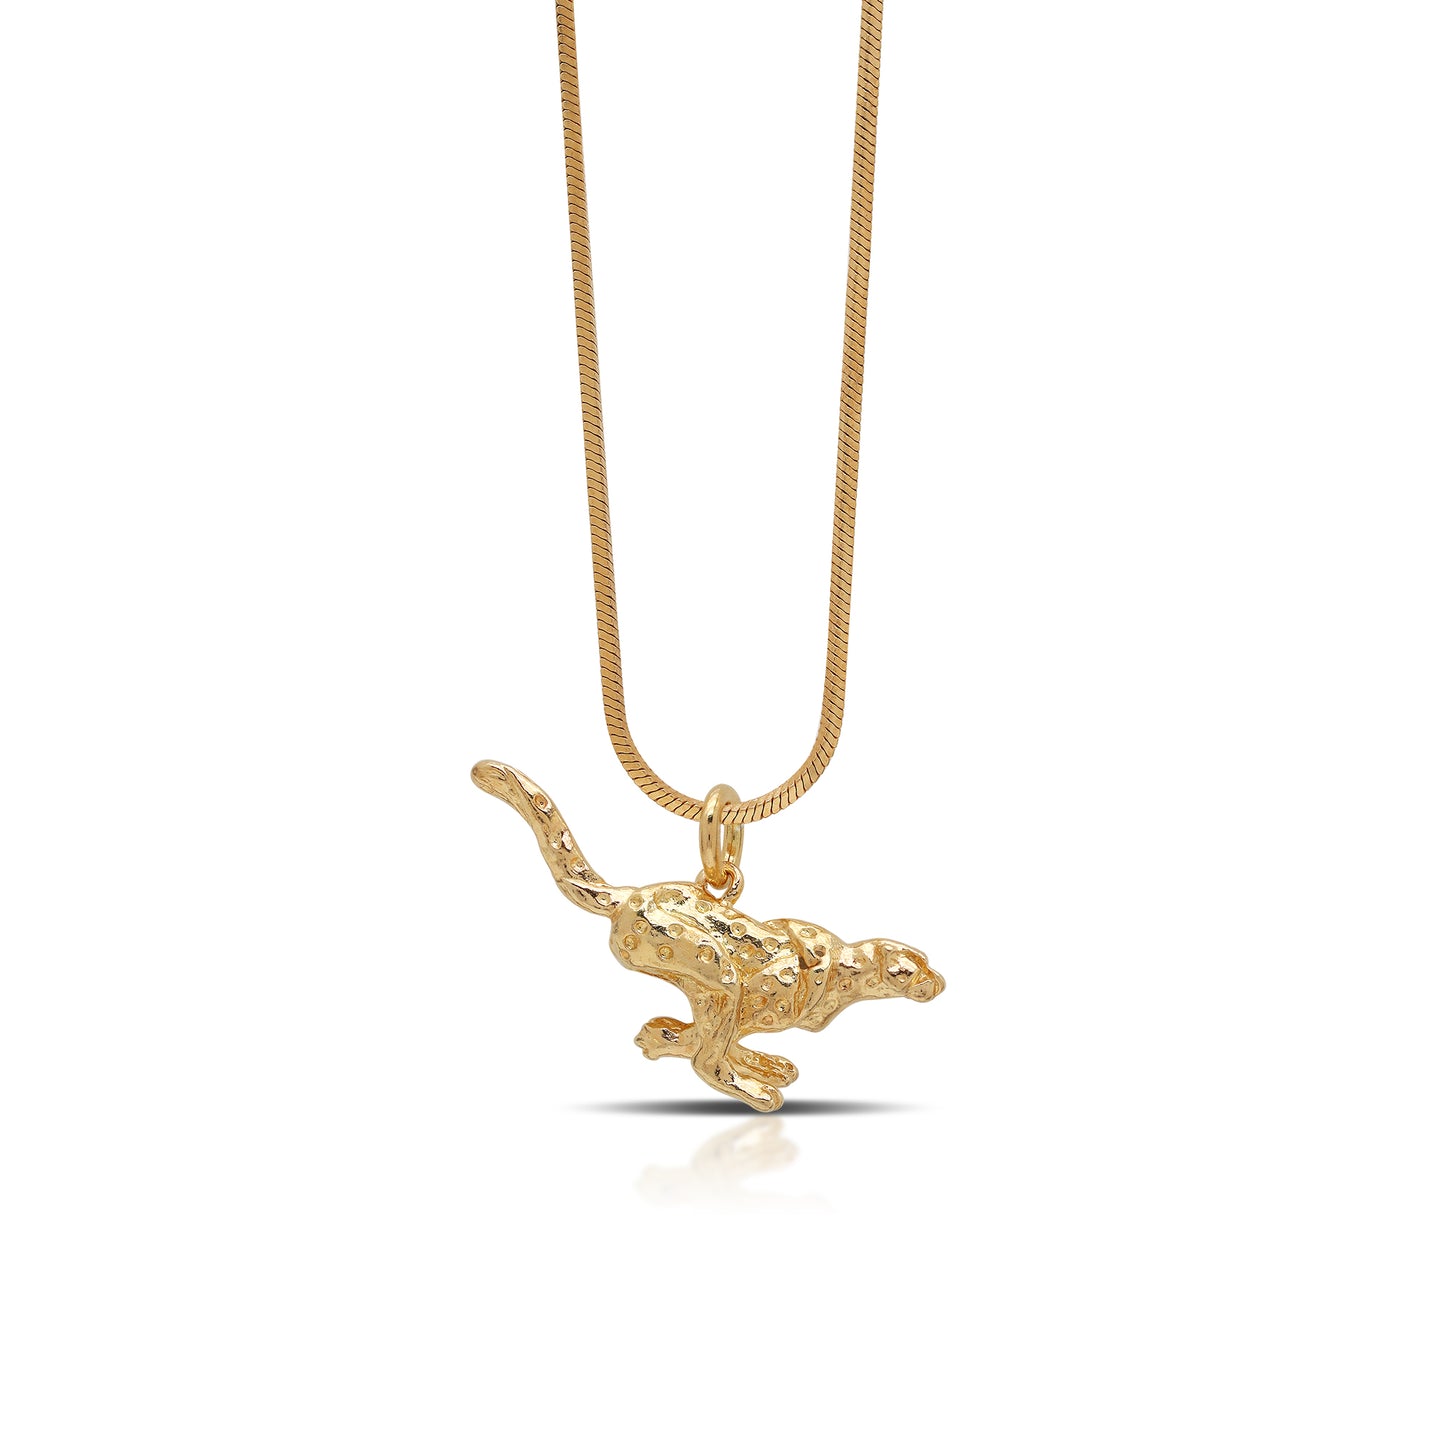 Cheetah Origami with Snake Chain Necklace